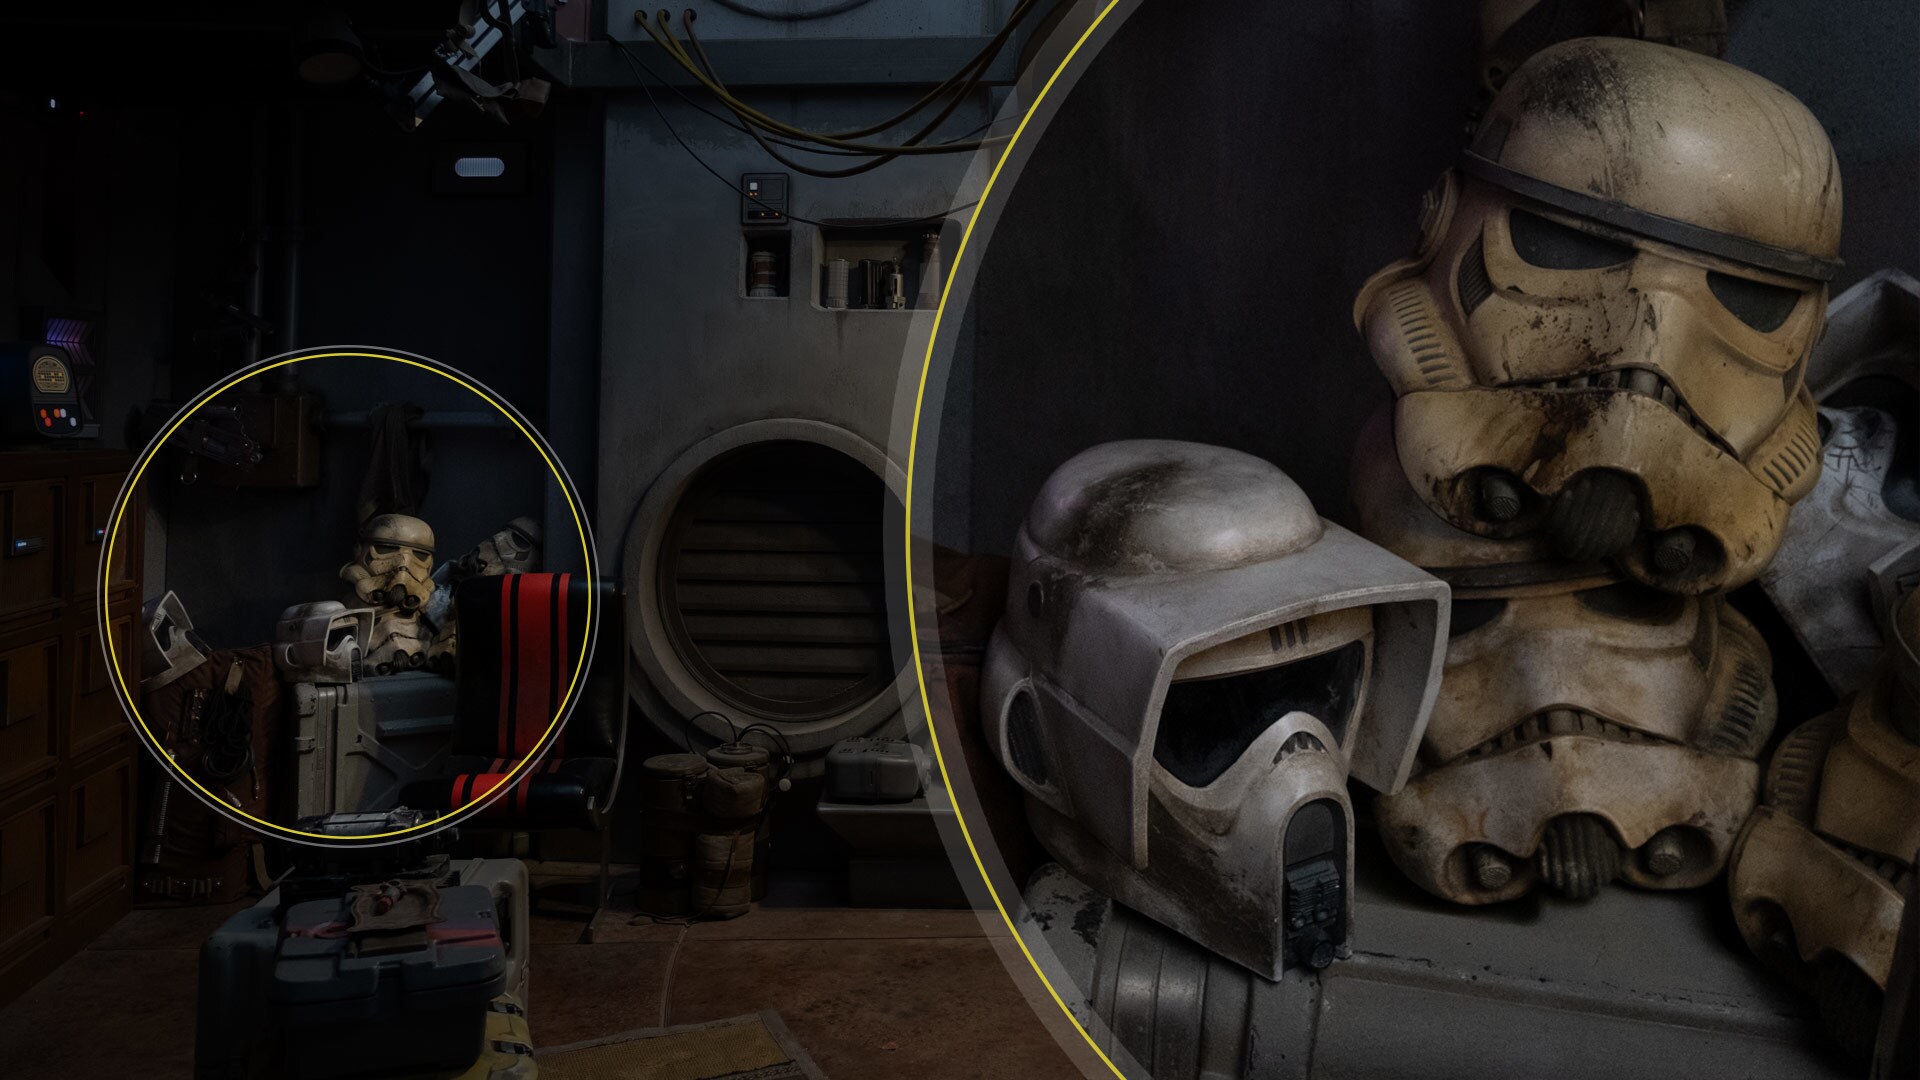 Near the painted versions, real stormtrooper helmets and a clean scout trooper bucket can be seen piled on a crate near the head of Sabine’s bed.